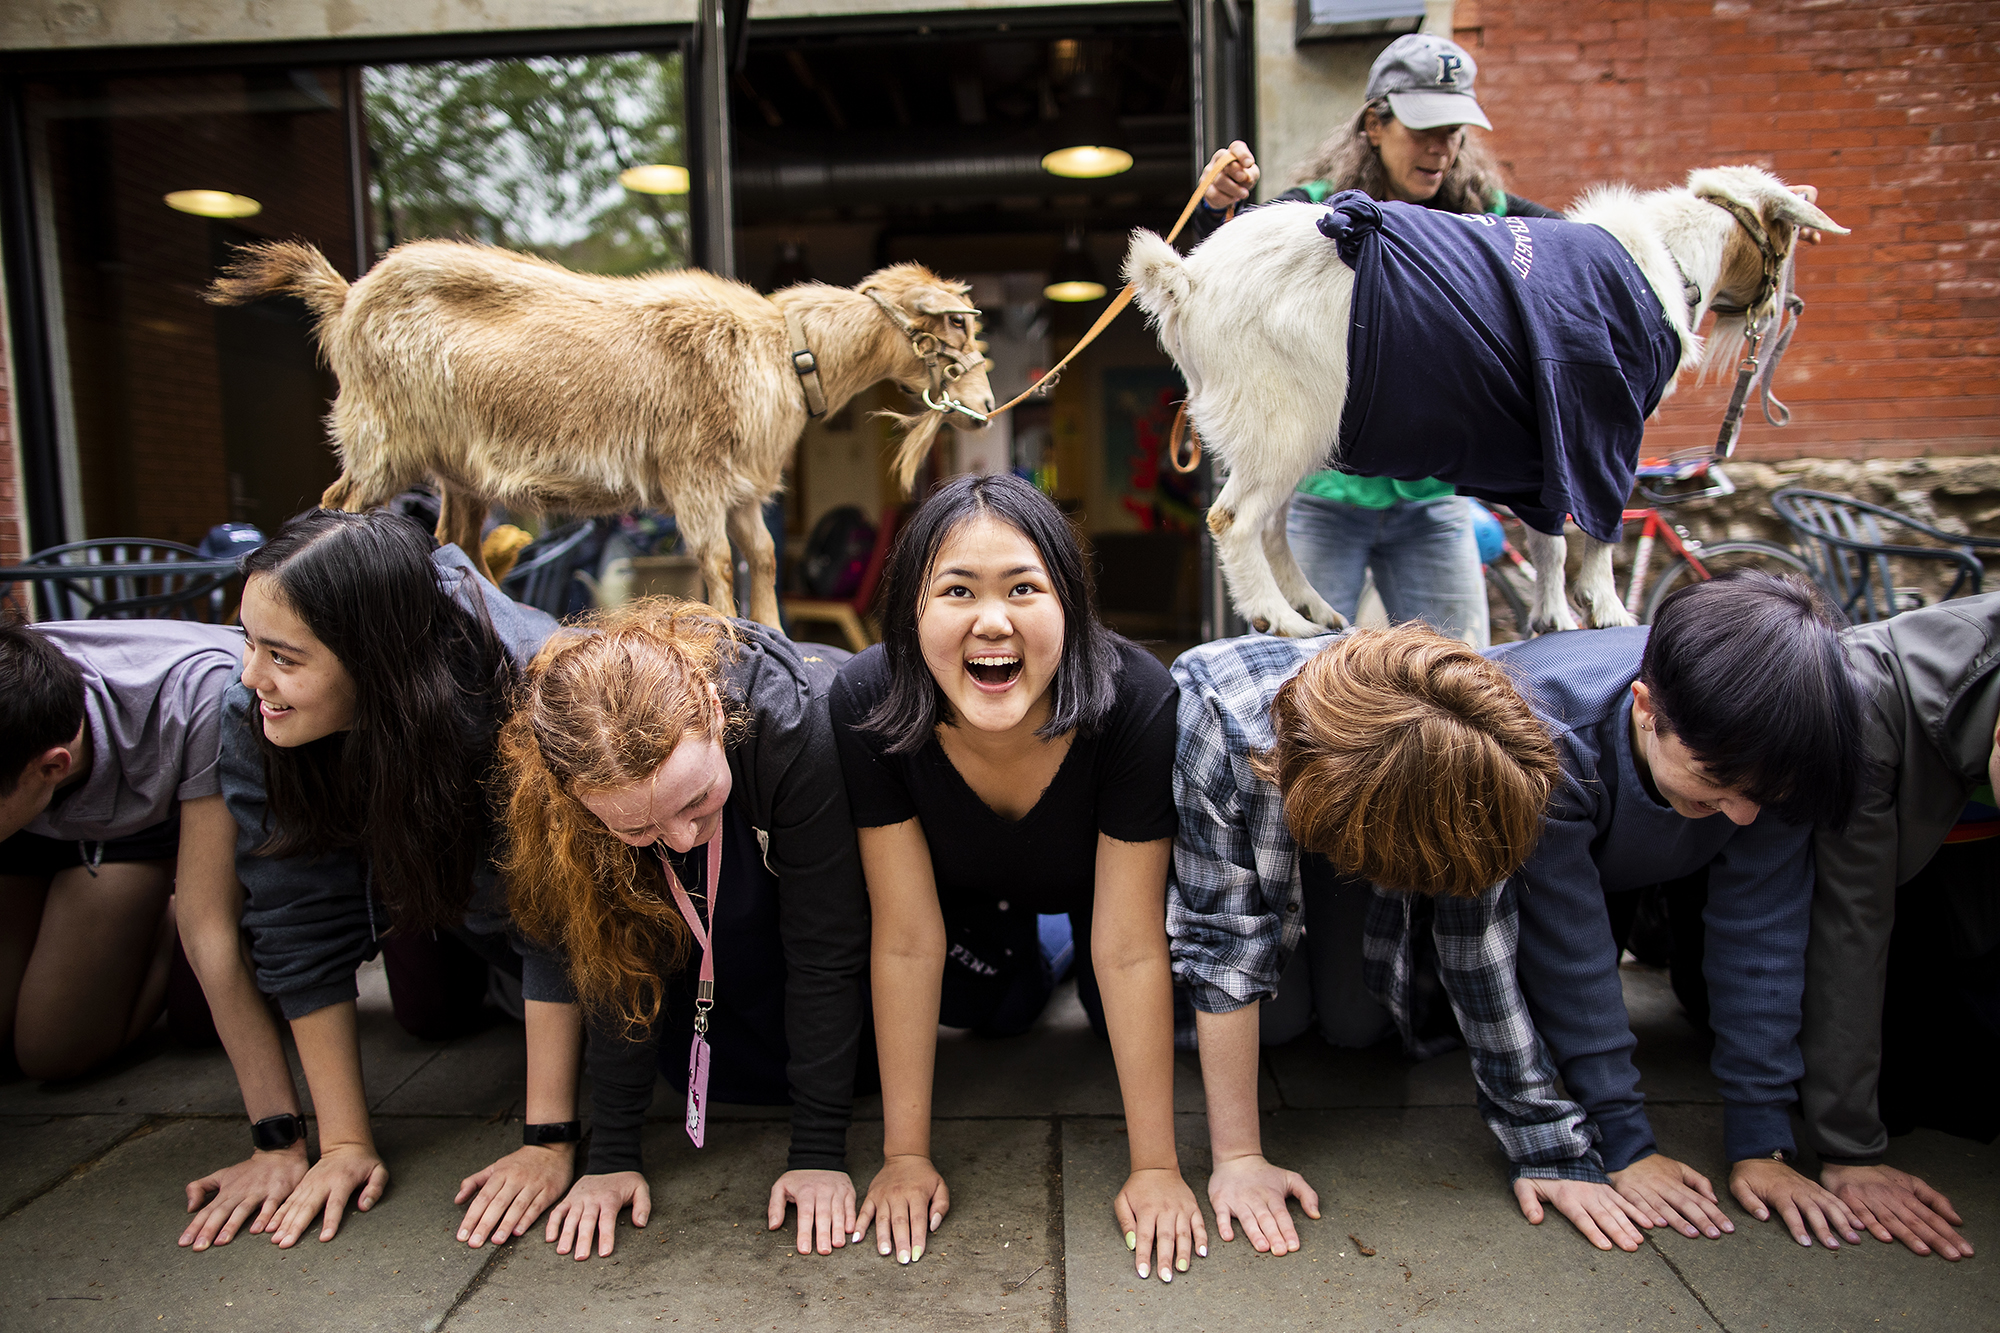 goats climb over students during a study break